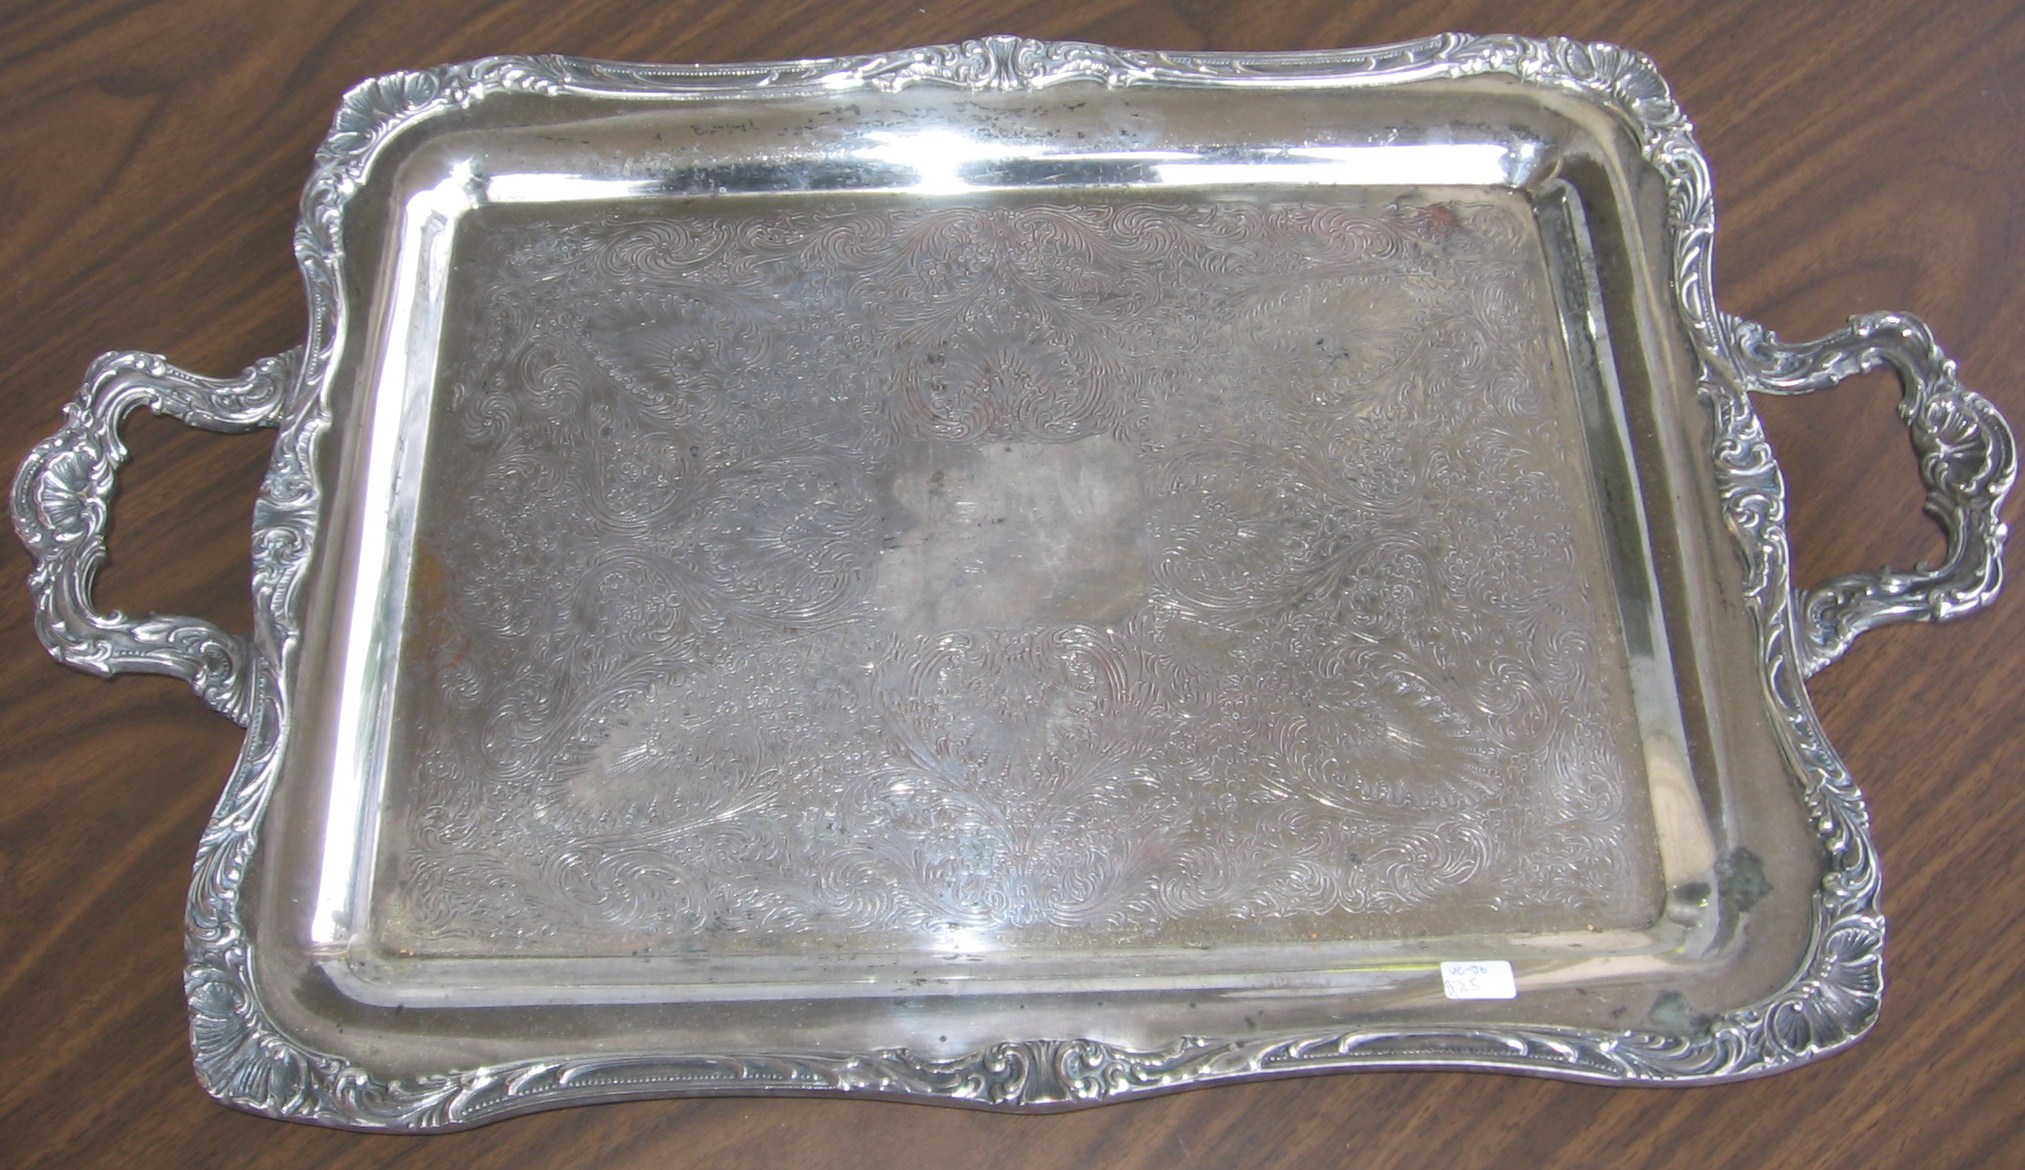 silver square tray with silver metal decoration sitting on wooden table